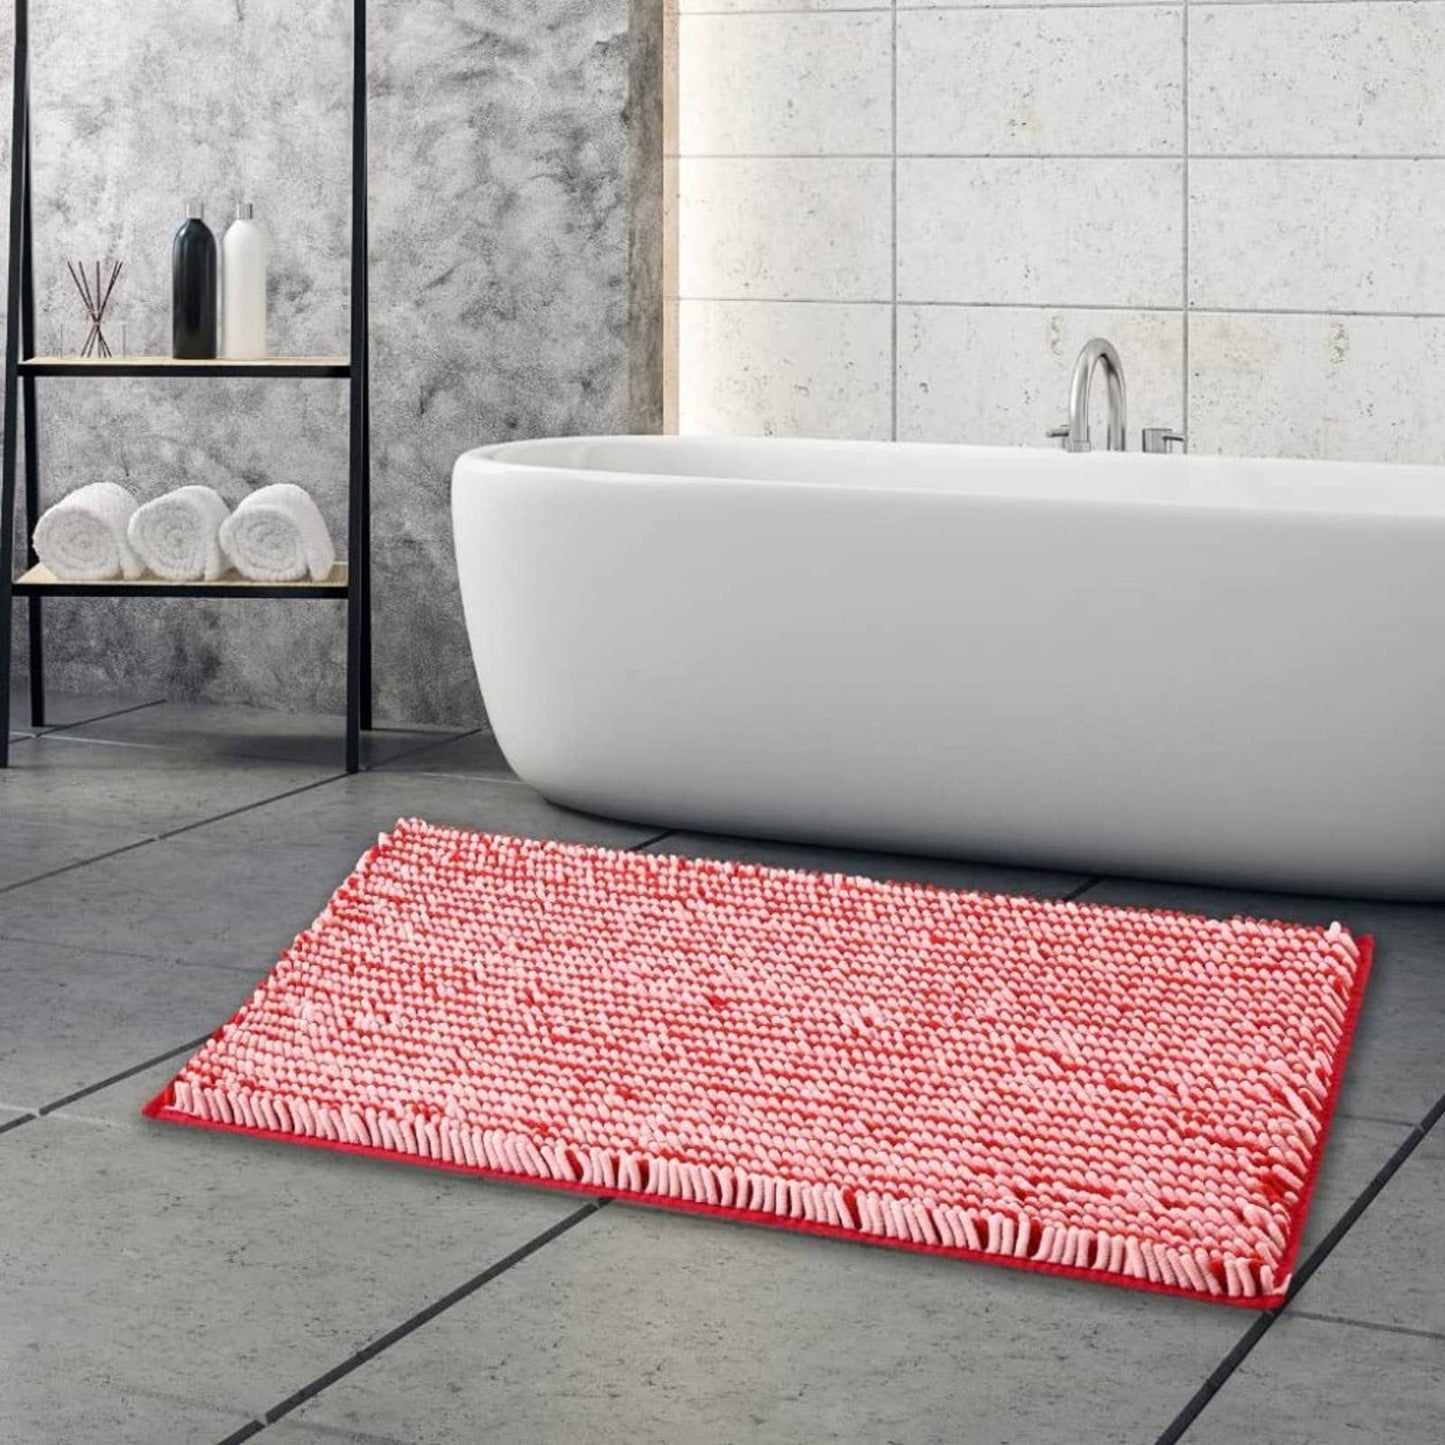 NUOVARUGS Bathroom Rug Anti-Slip Chenille Bath Mat Soft and Cozy Super Absorbent